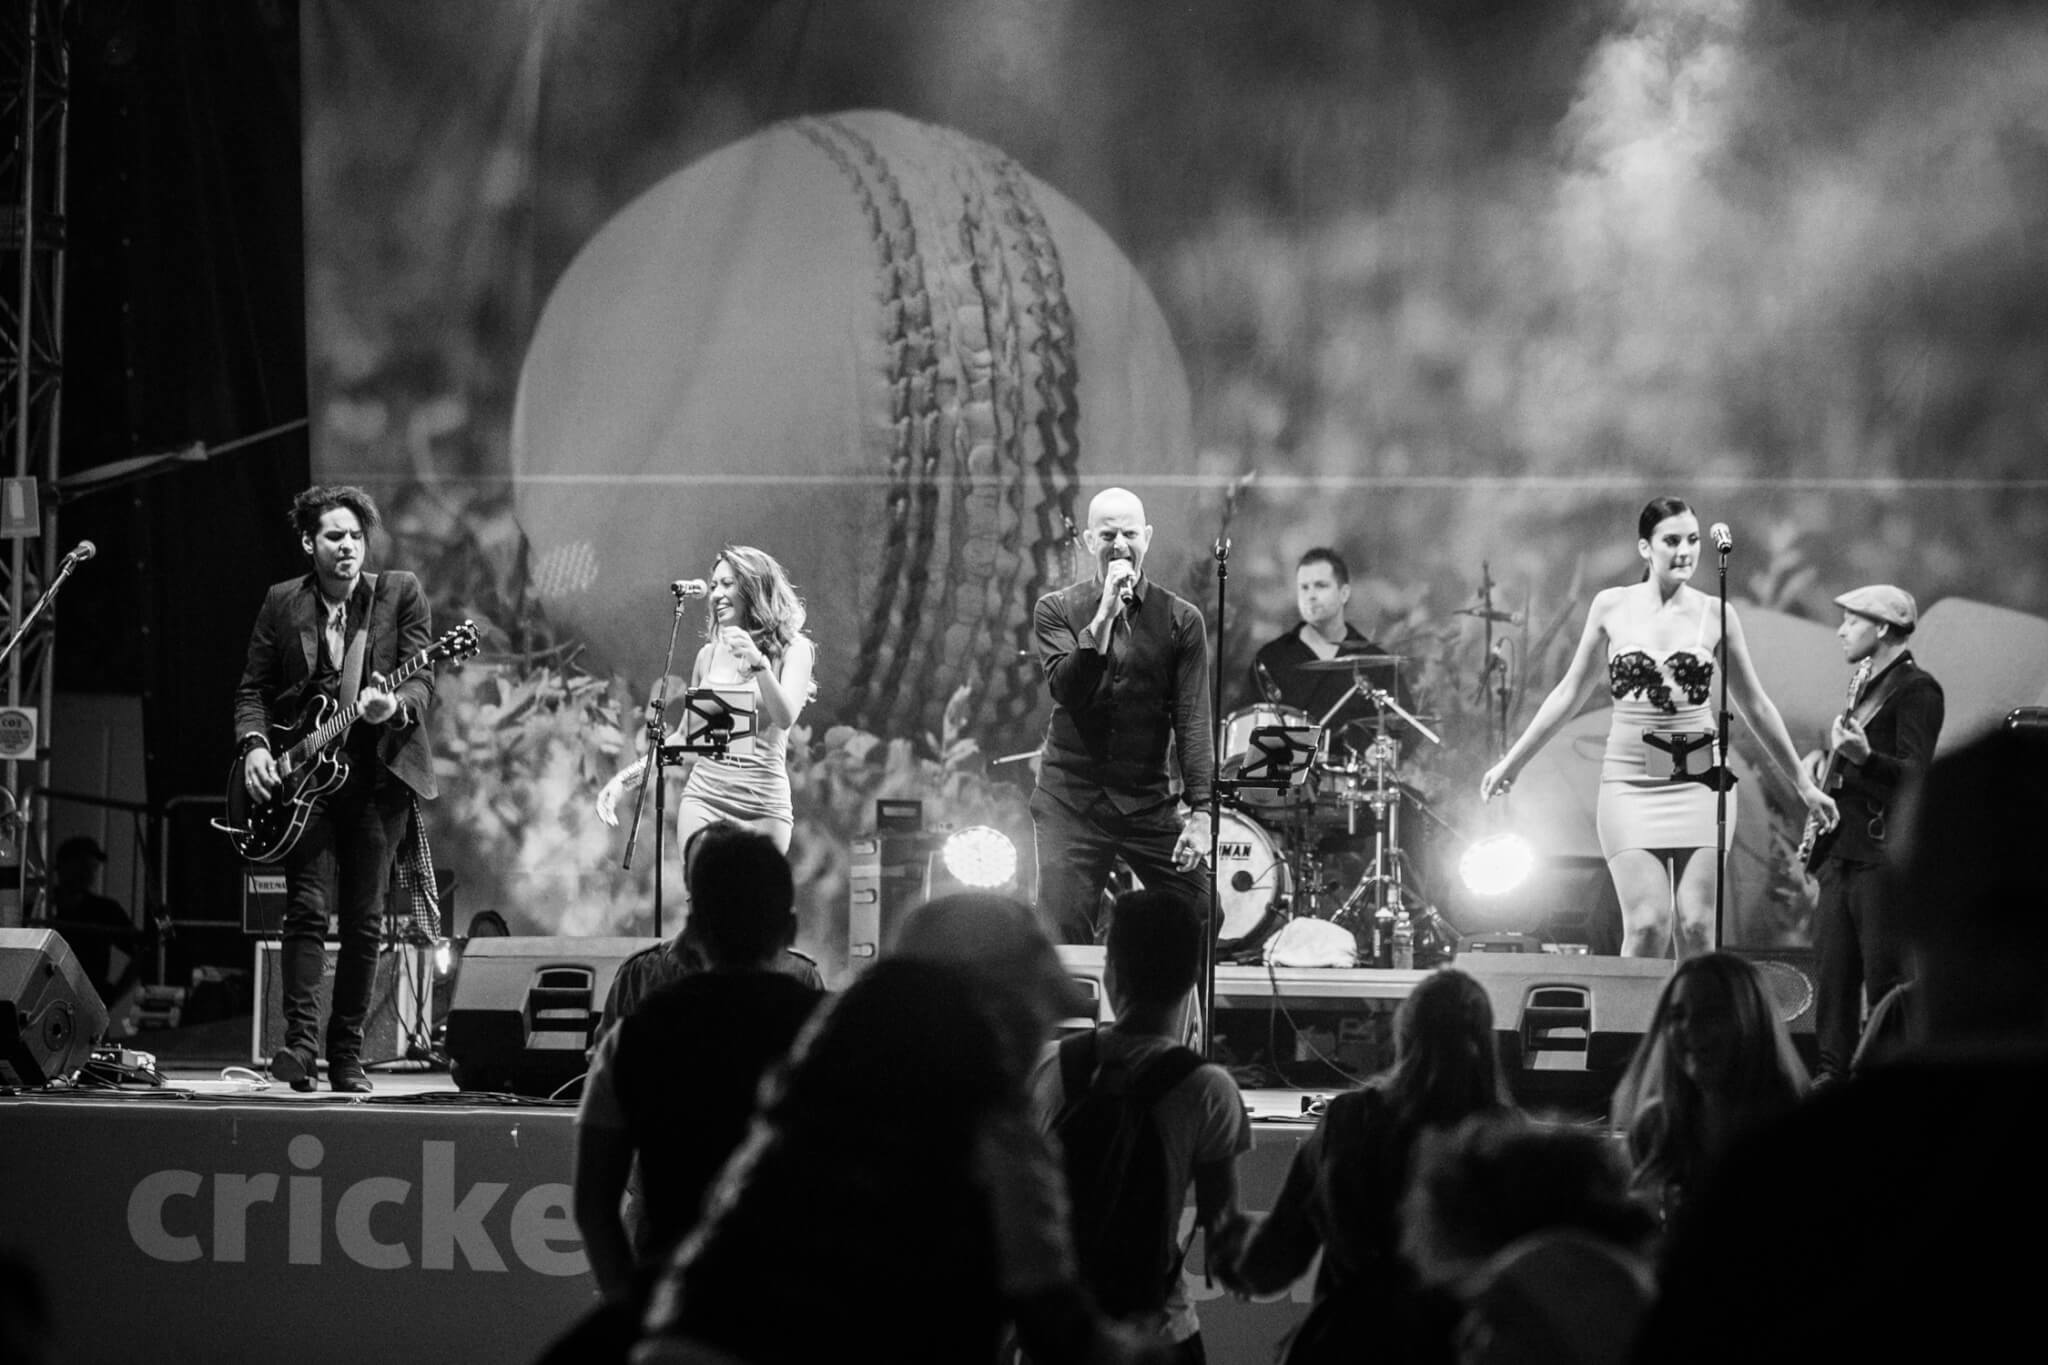 Chunky Jam world cup cricket-12 corporate cover band-wedding band-party band-melbourne